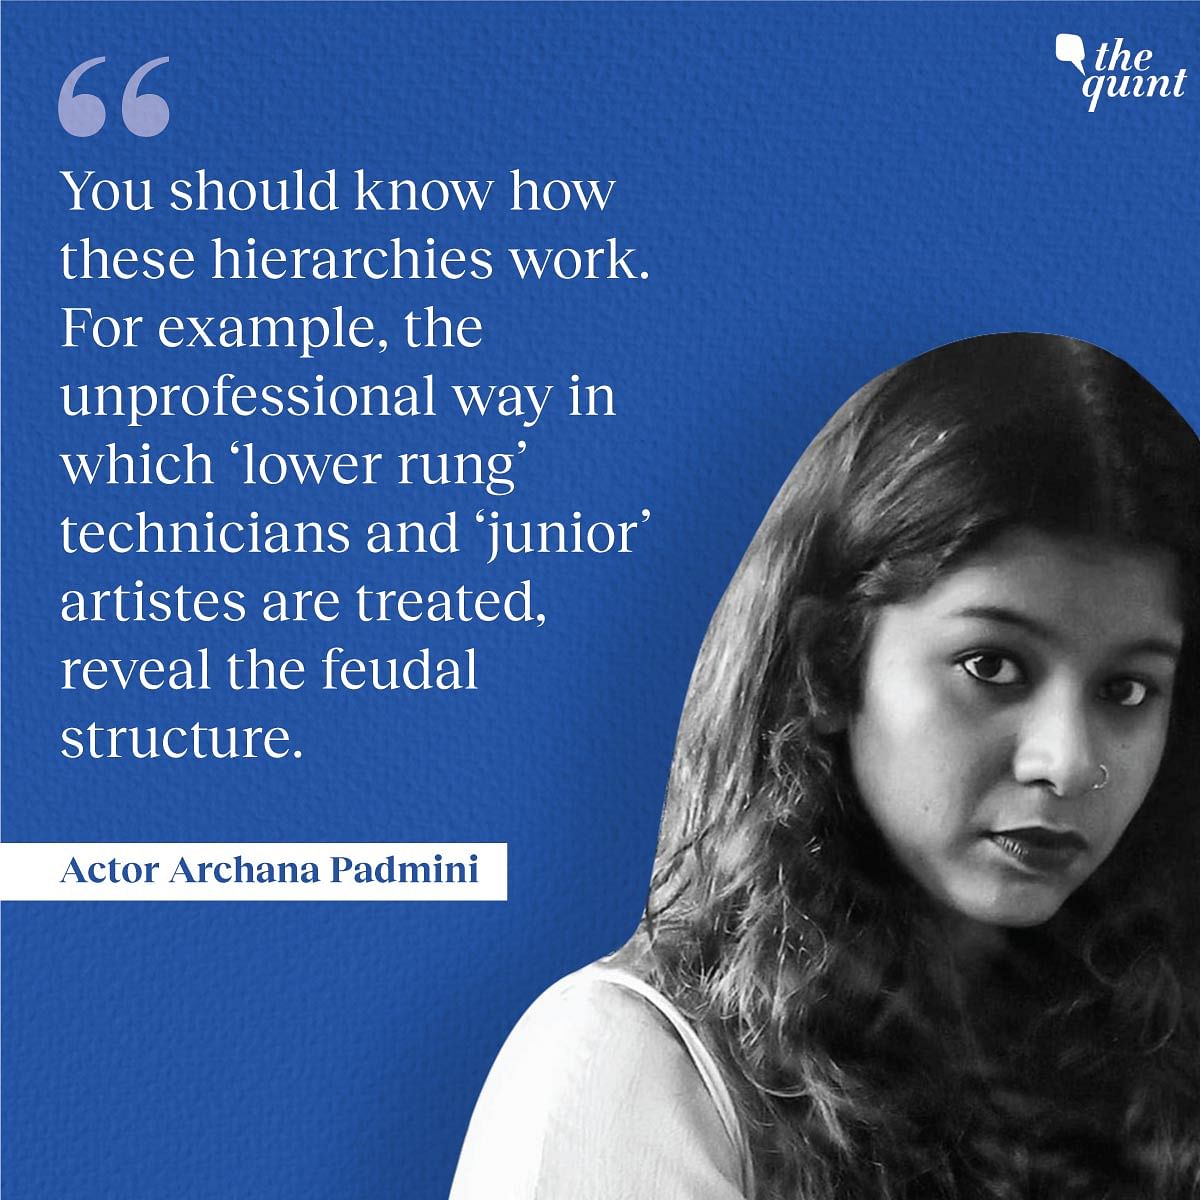 Archana Padmini had spoken of the undefined workspace in the Malayalam film industry to Justice K Hema committee.